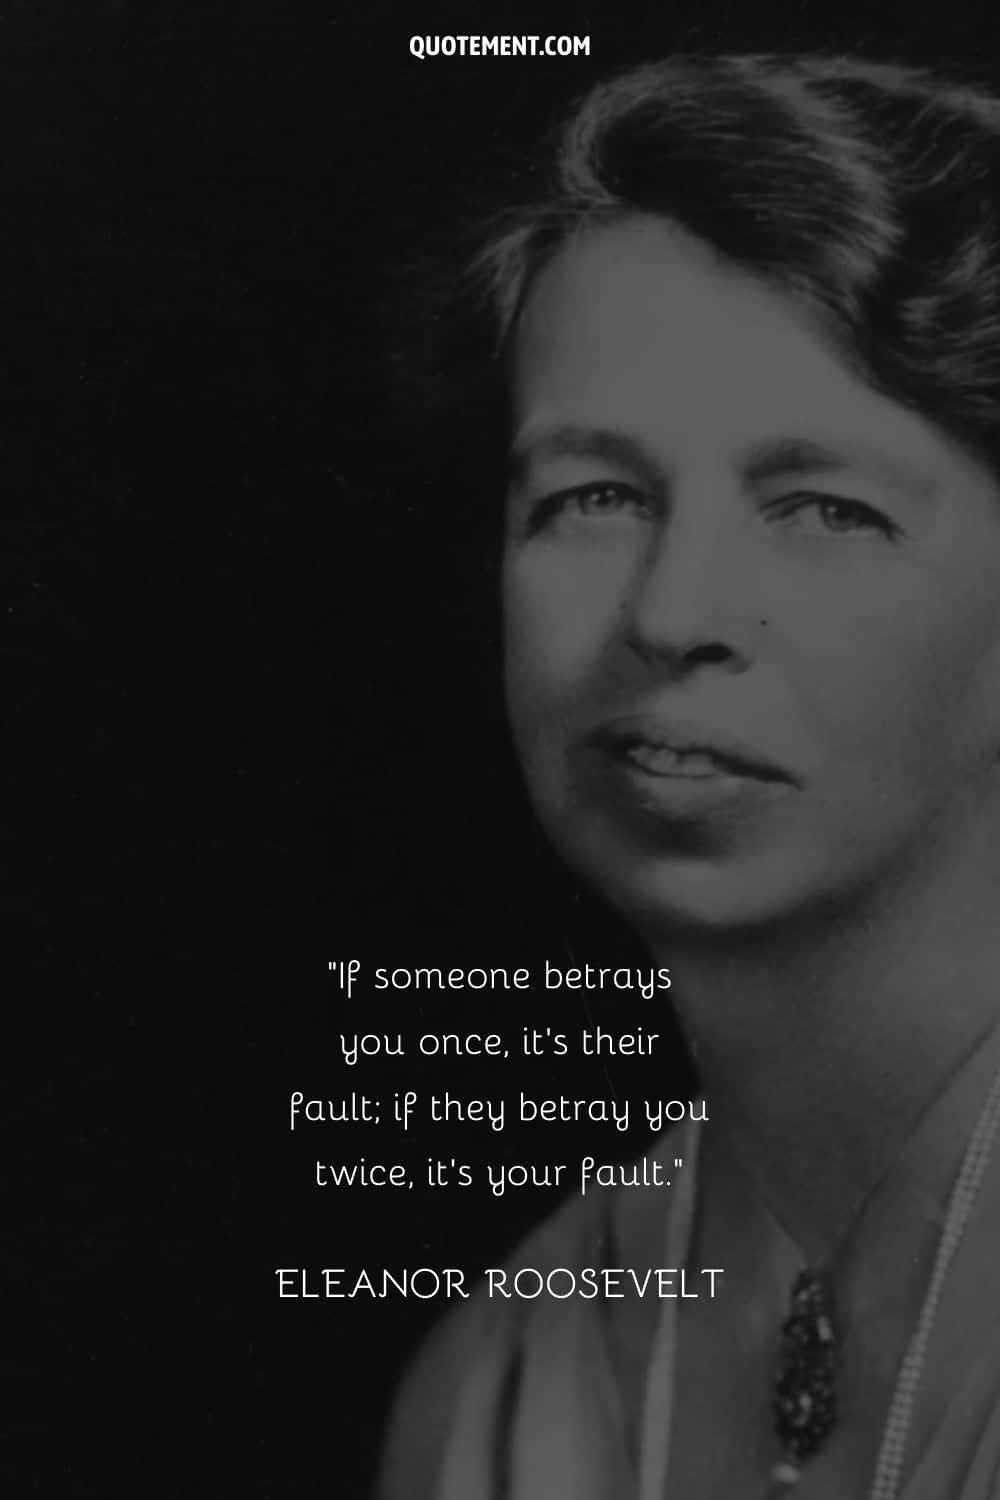 If someone betrays you once, it's their fault; if they betray you twice, it's your fault. — Eleanor Roosevelt